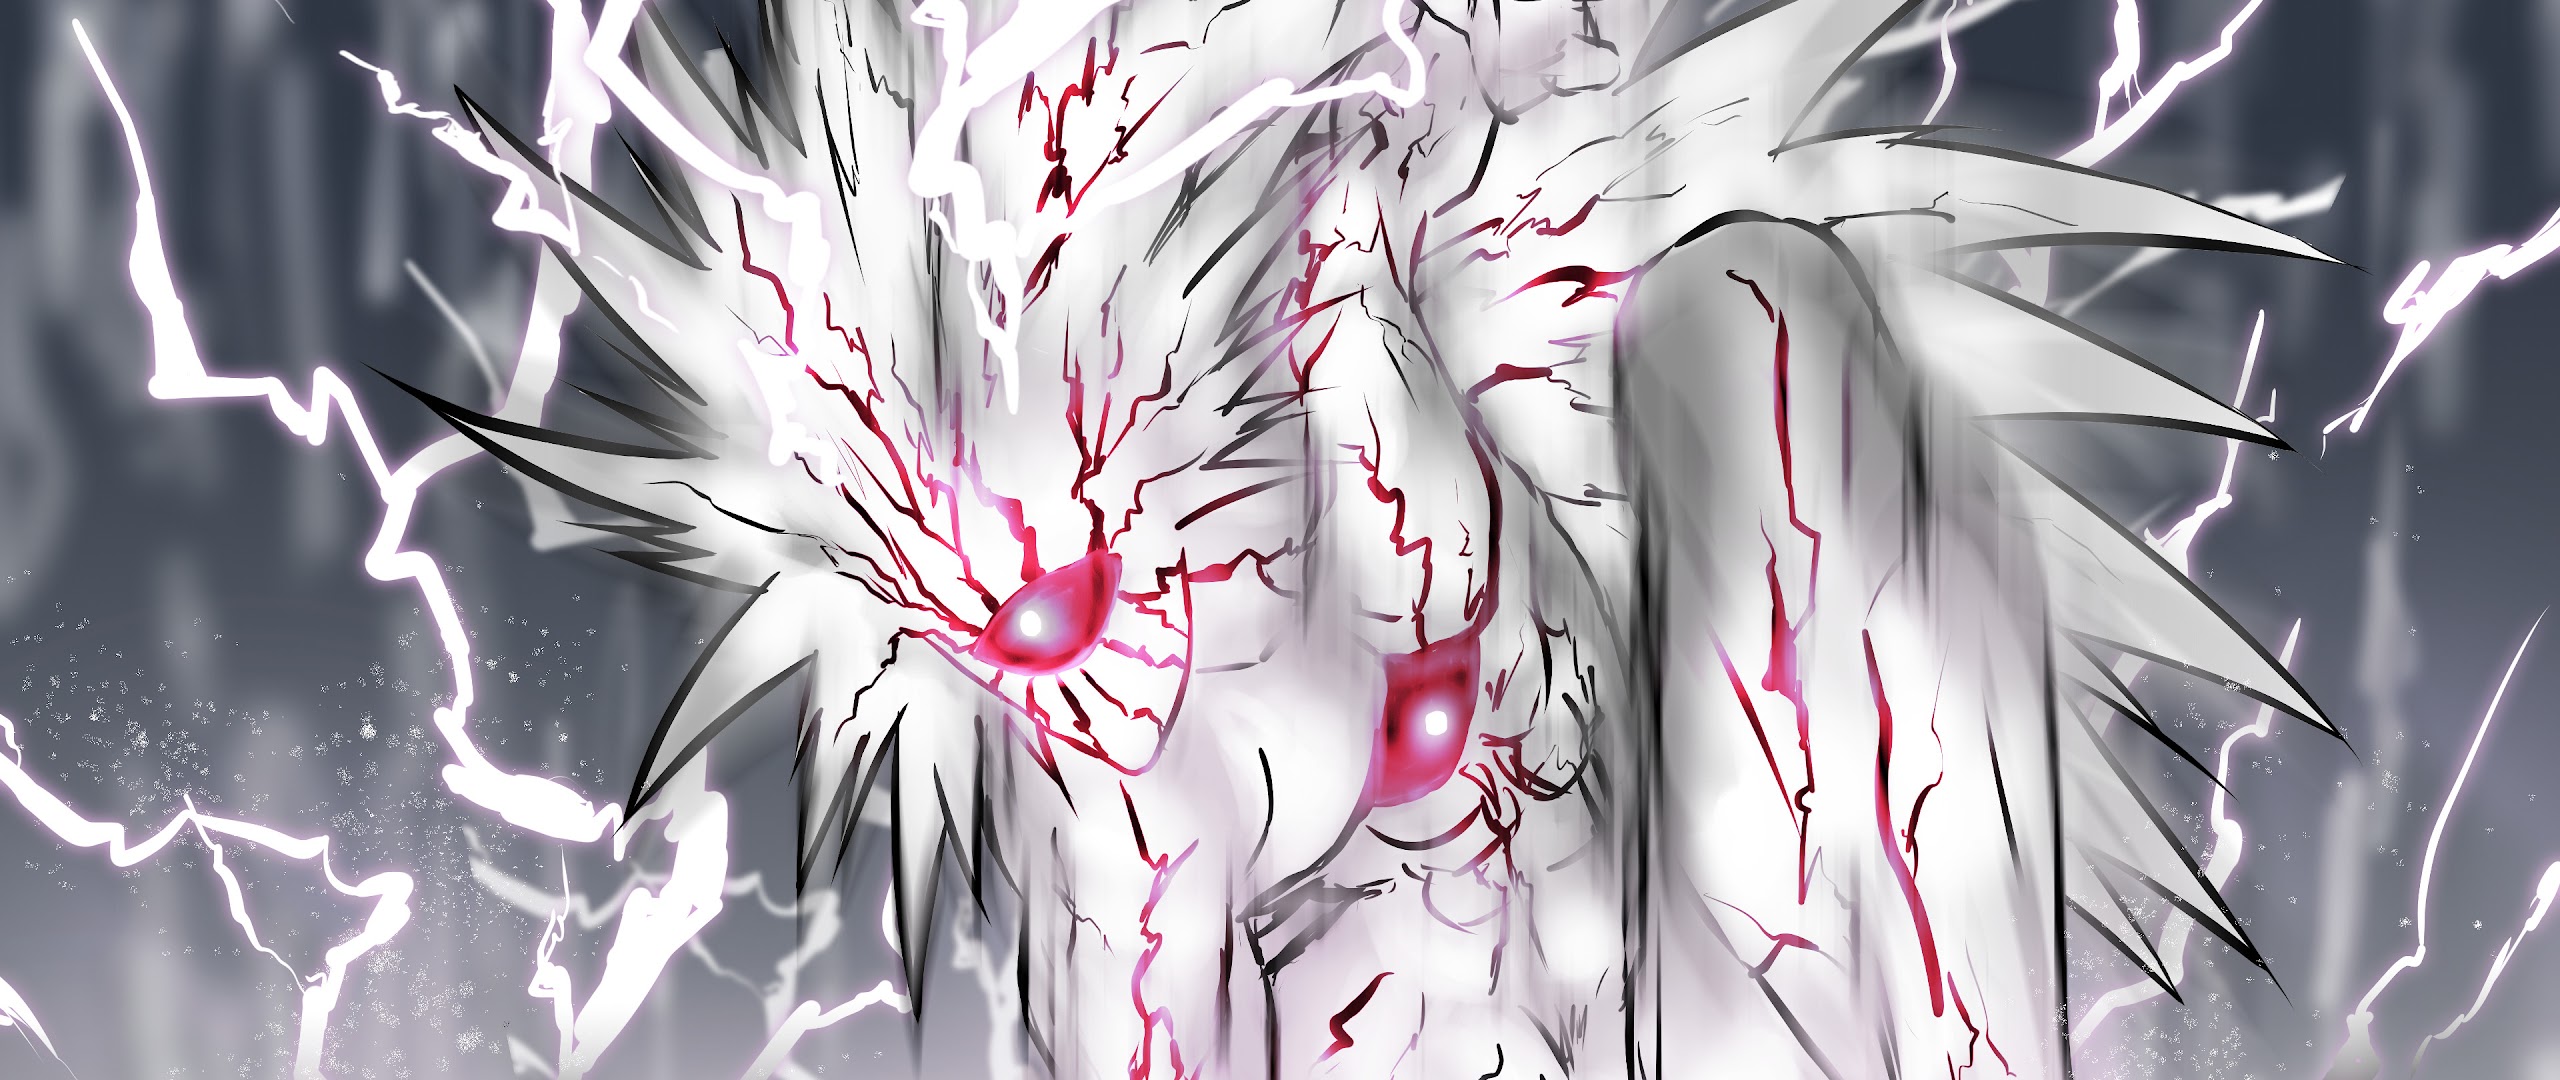 Boros Art Hd One-Punch Man Wallpapers